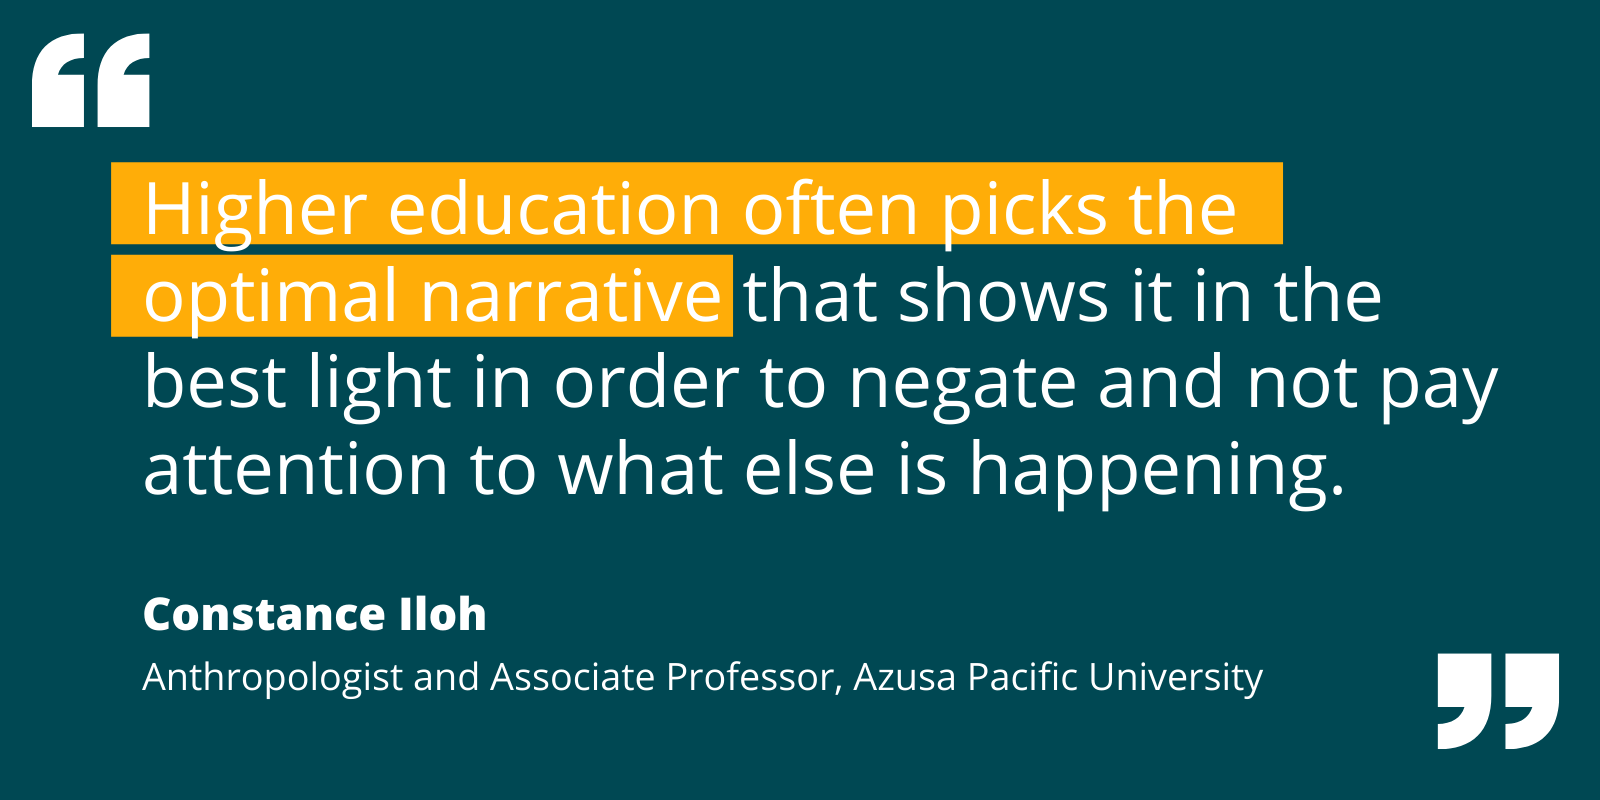 Quote by Constance Iloh re: how "Higher education often picks the optimal narrative that shows it in the best light."